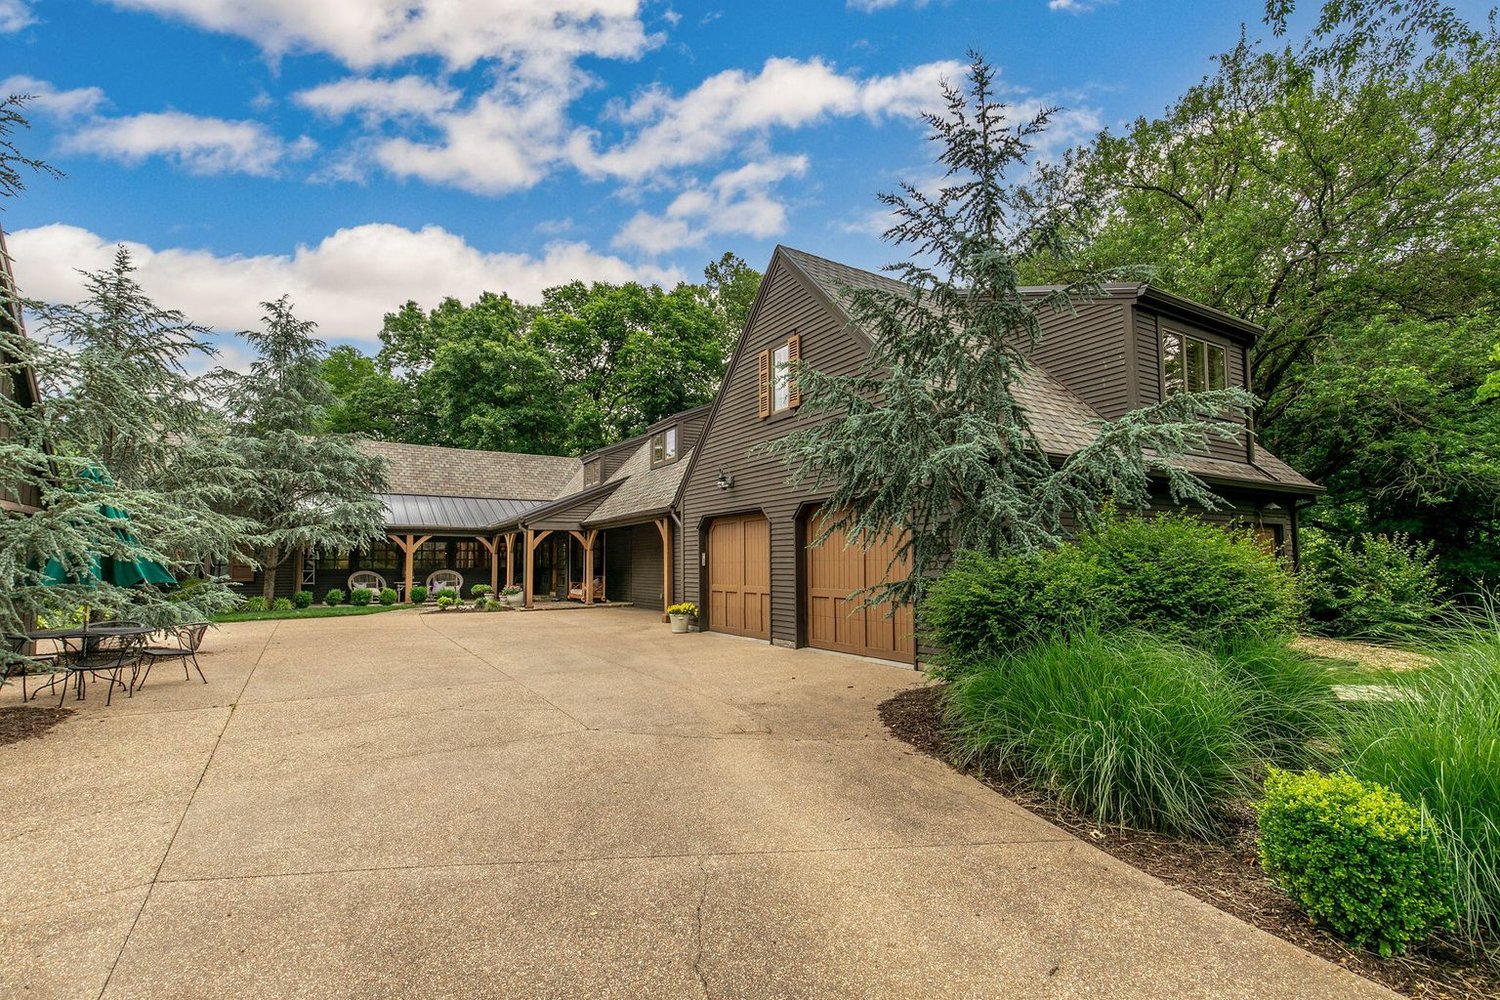 4571 E. Farm Road 144
$2 million
Bedrooms: 6
Bathrooms: 6
Listing firm: Cantrell Real Estate